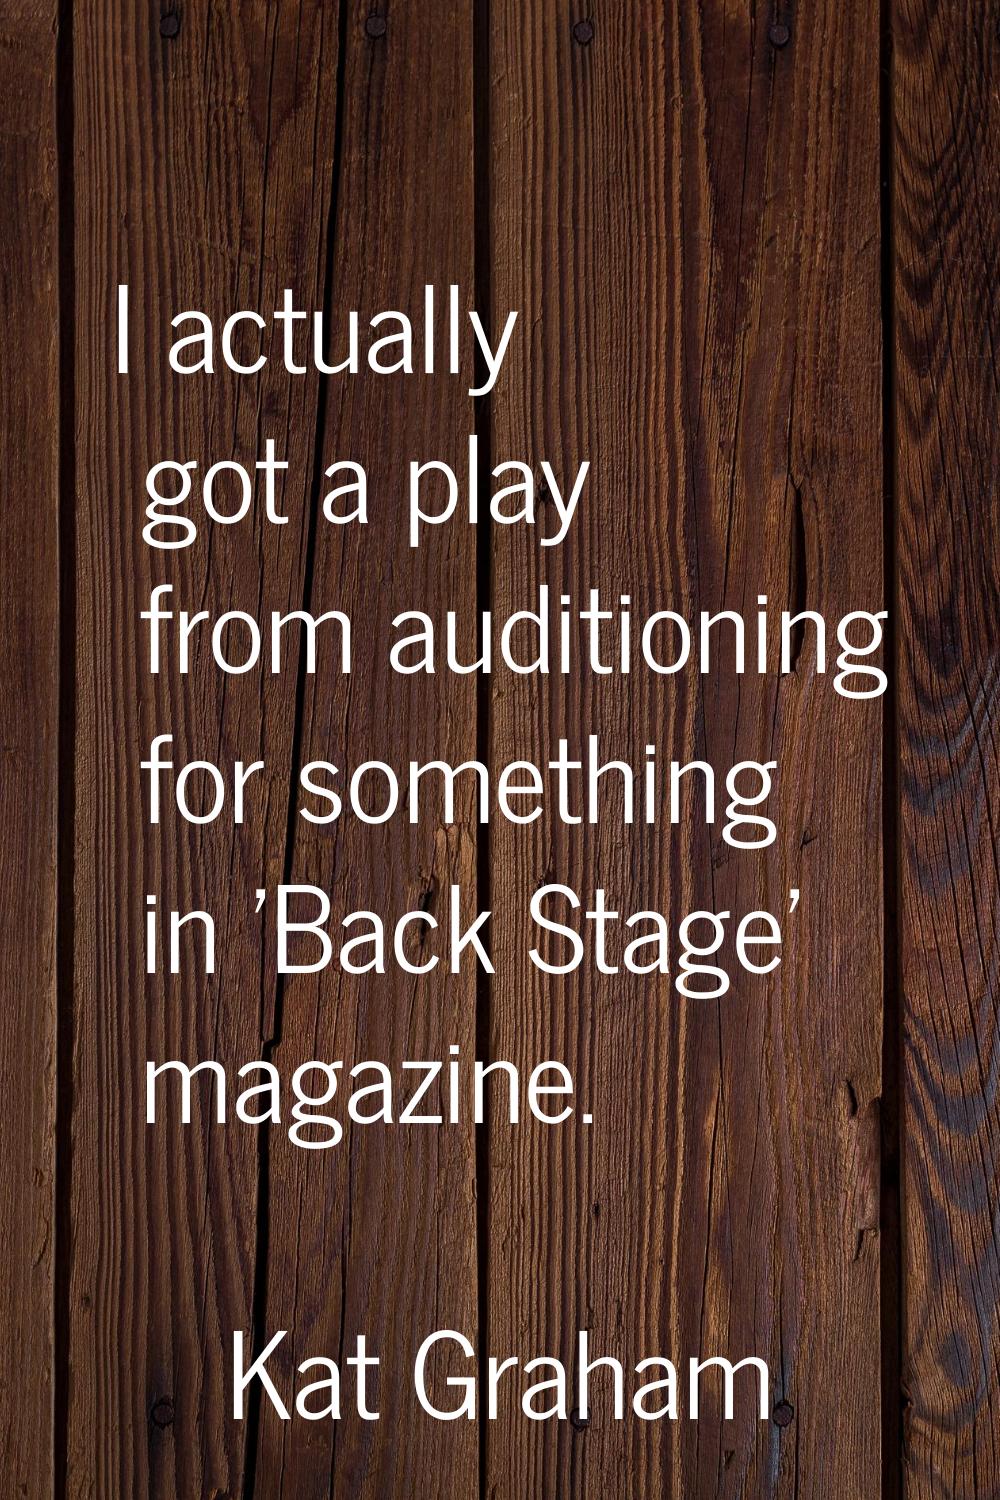 I actually got a play from auditioning for something in 'Back Stage' magazine.